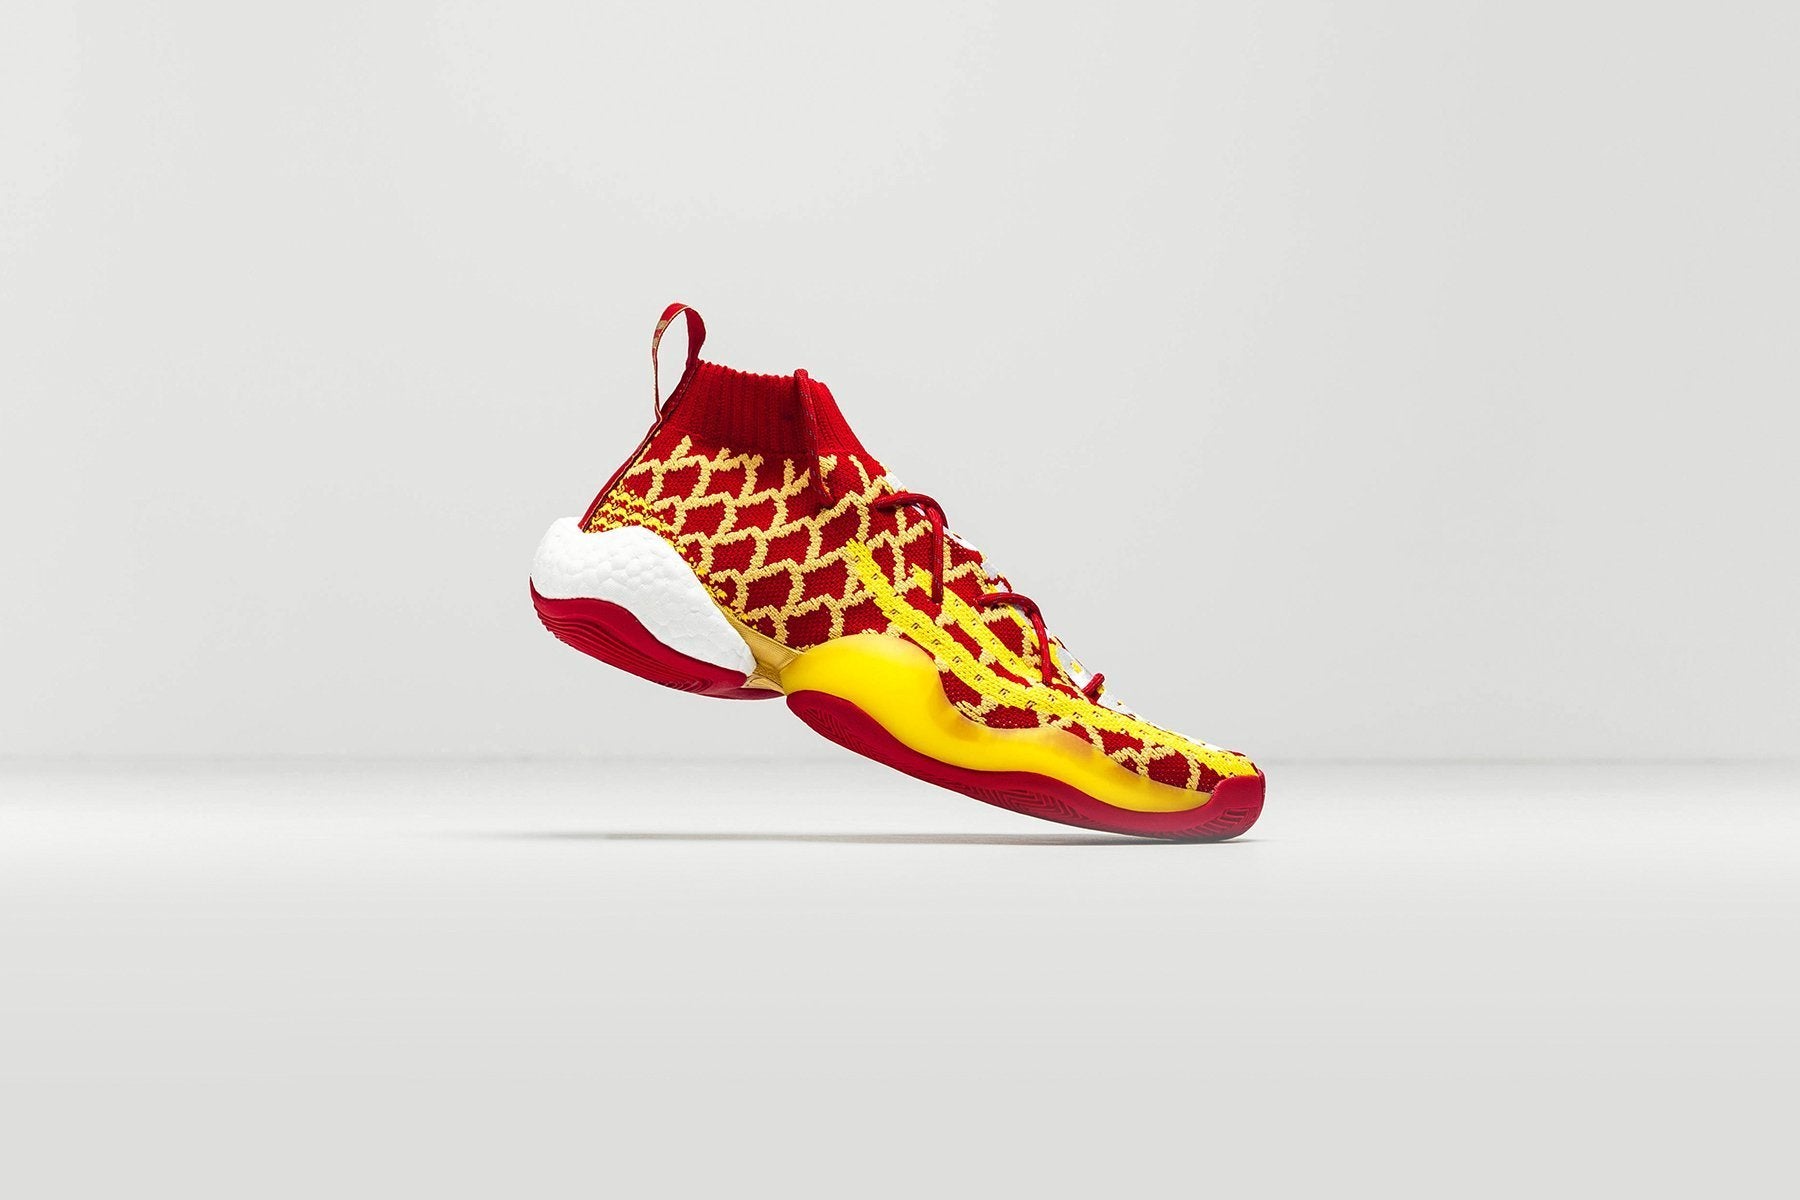 Adidas Originals x Pharrell Williams BYW - Scarlet, , large image number null